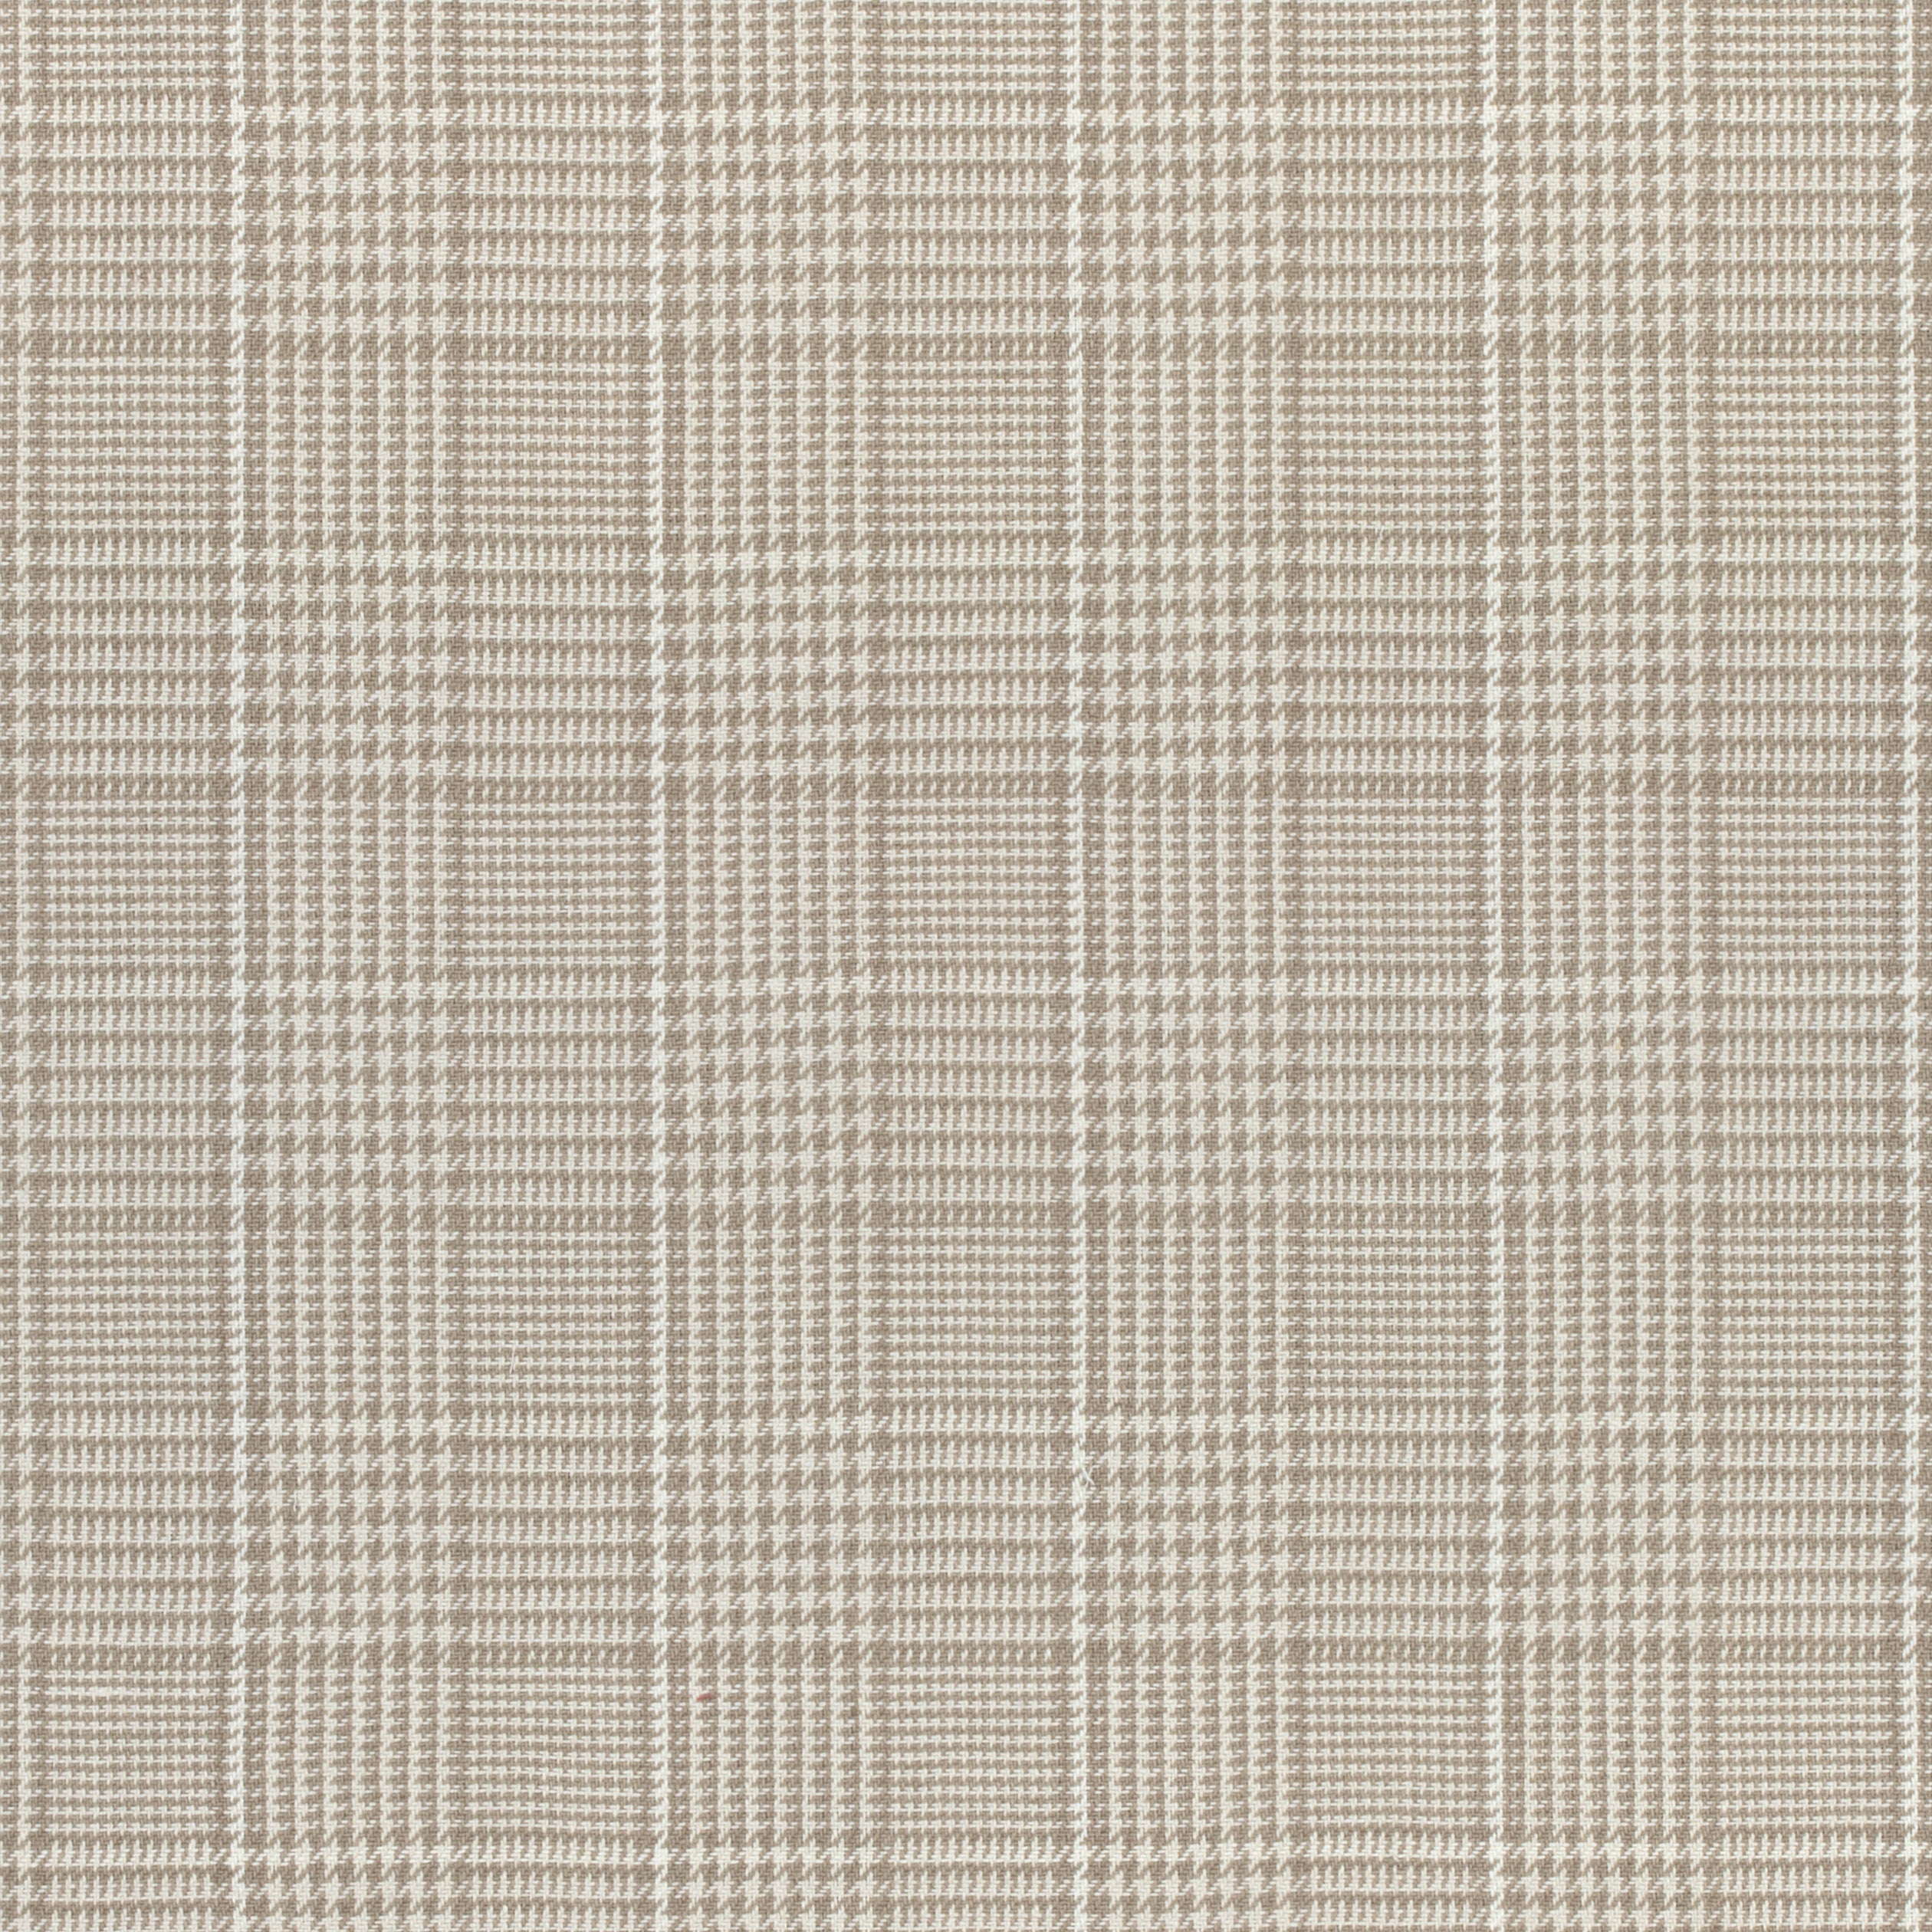 Grassmarket Check fabric in beige color - pattern number W710205 - by Thibaut in the Colony collection